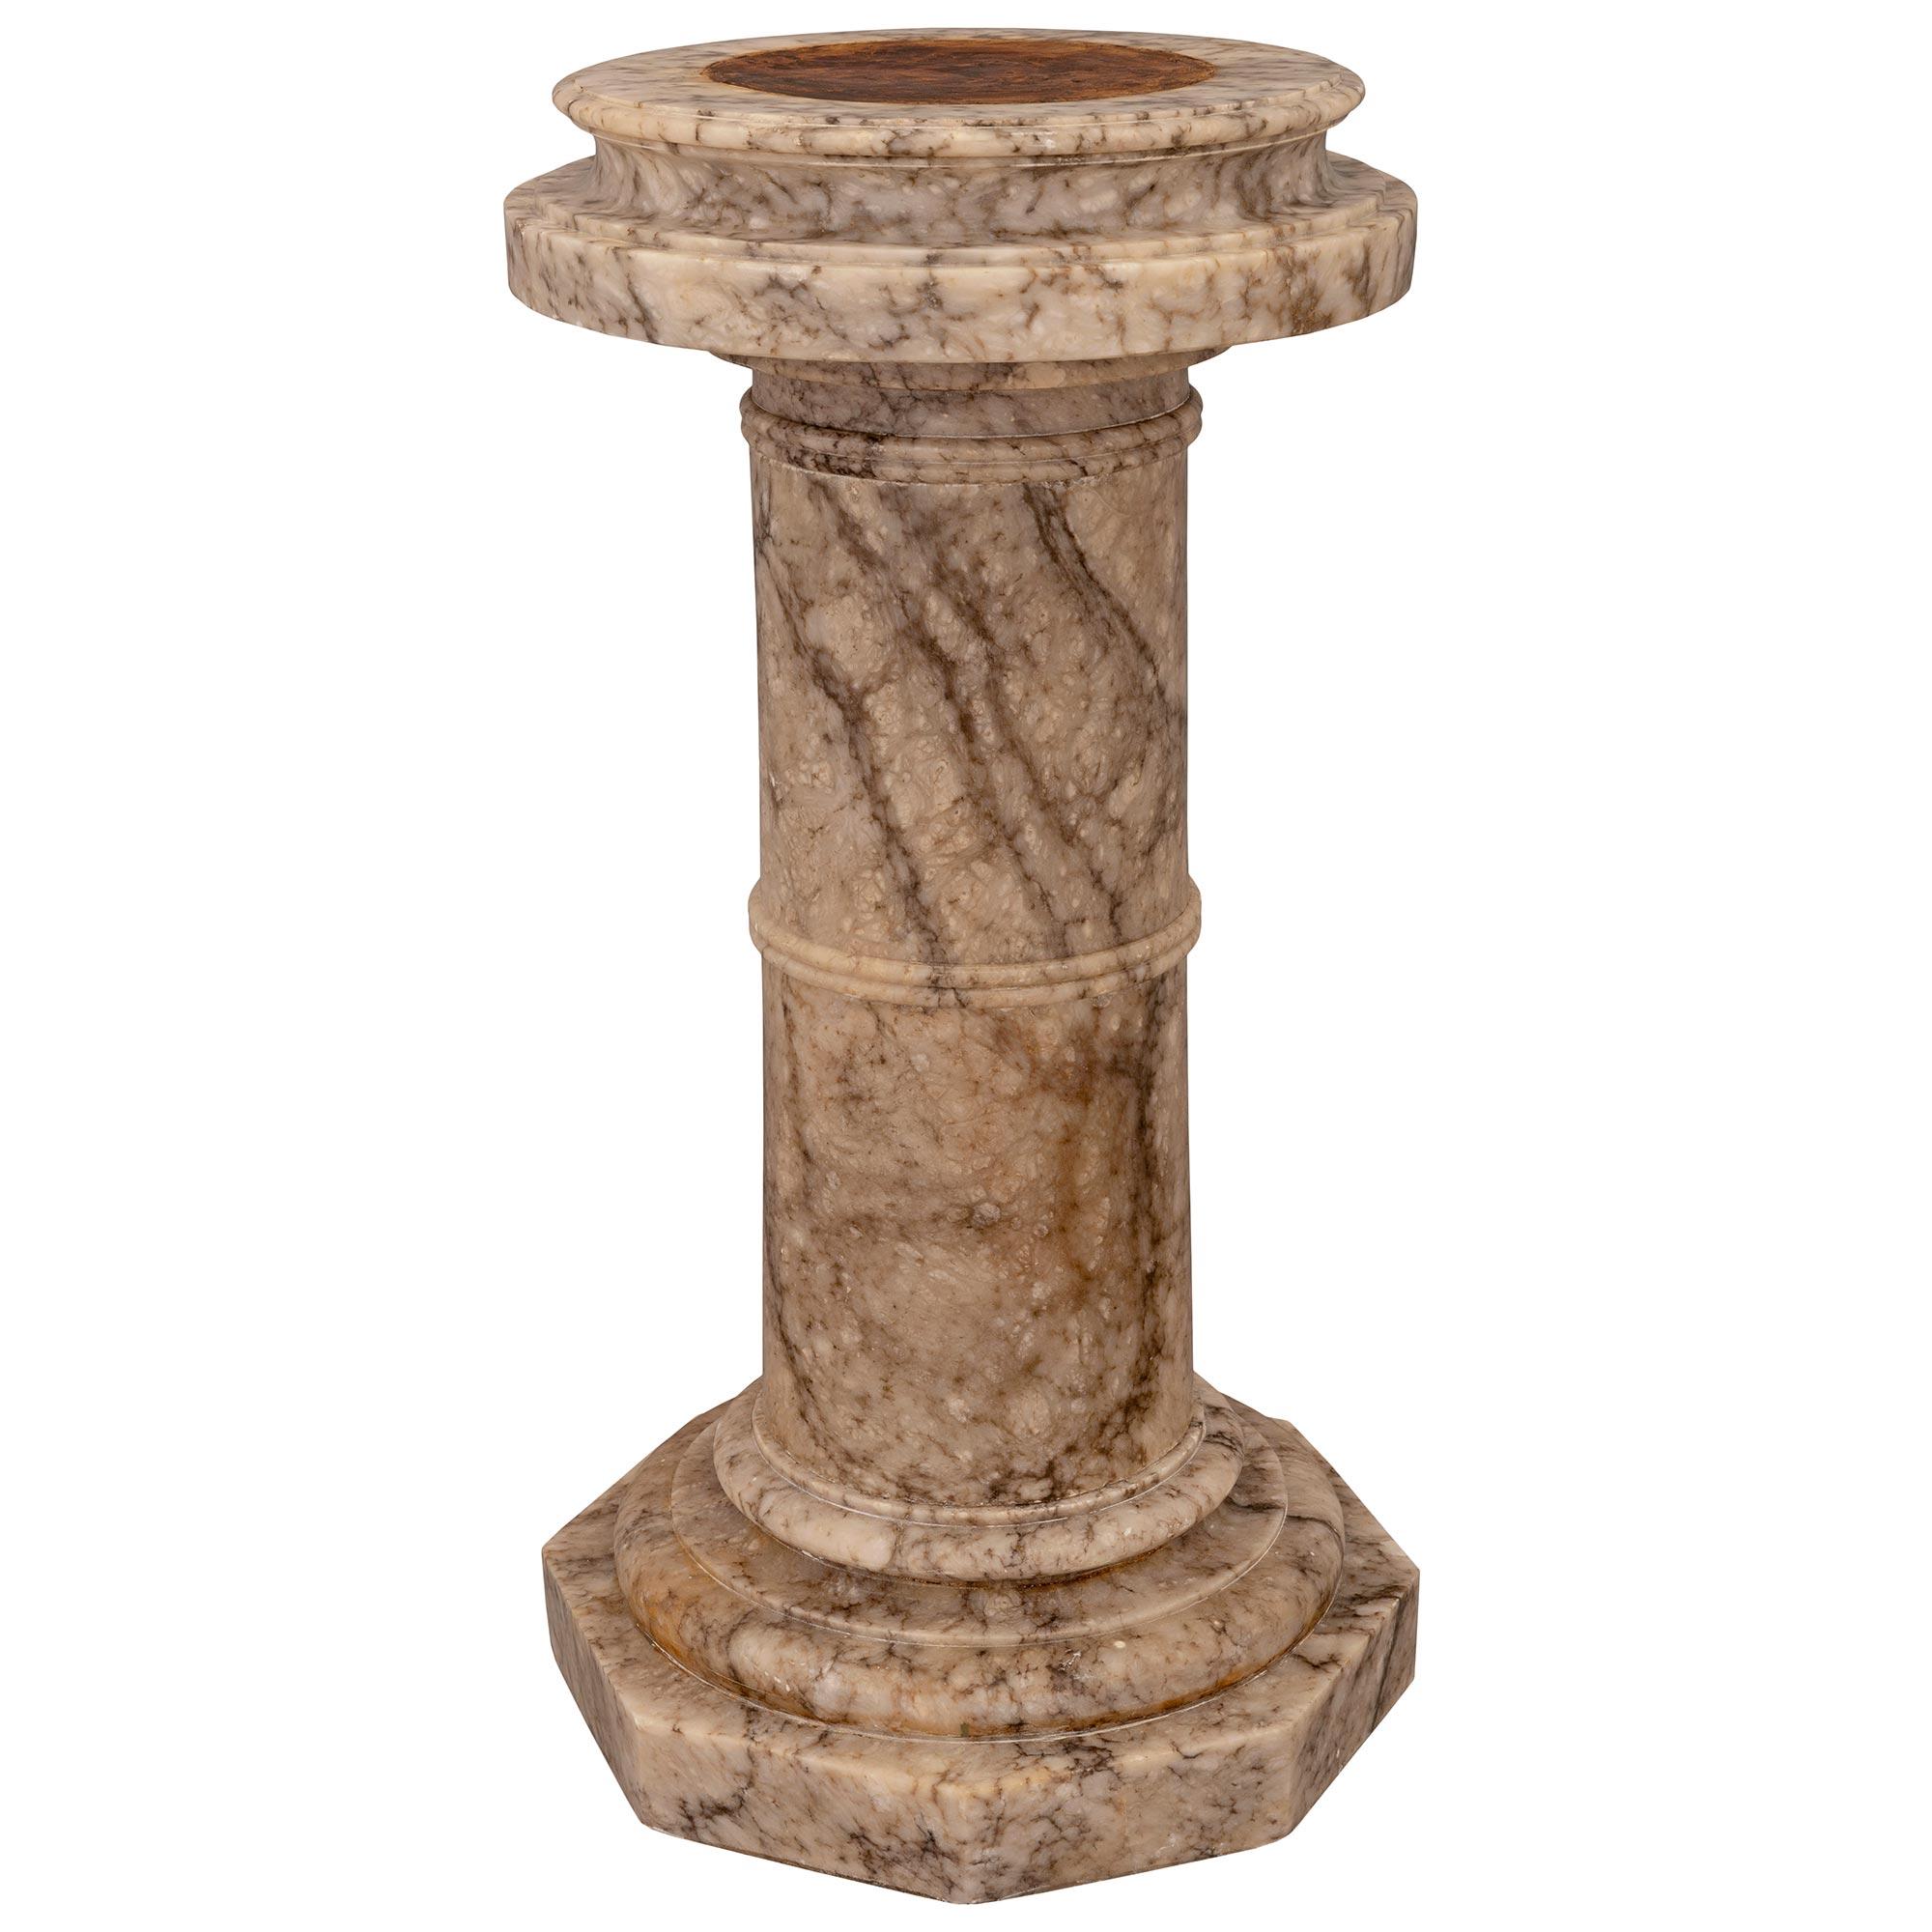 An Italian 19th Century Neo-Classical St. Alabaster Pedestal Column In Good Condition For Sale In West Palm Beach, FL